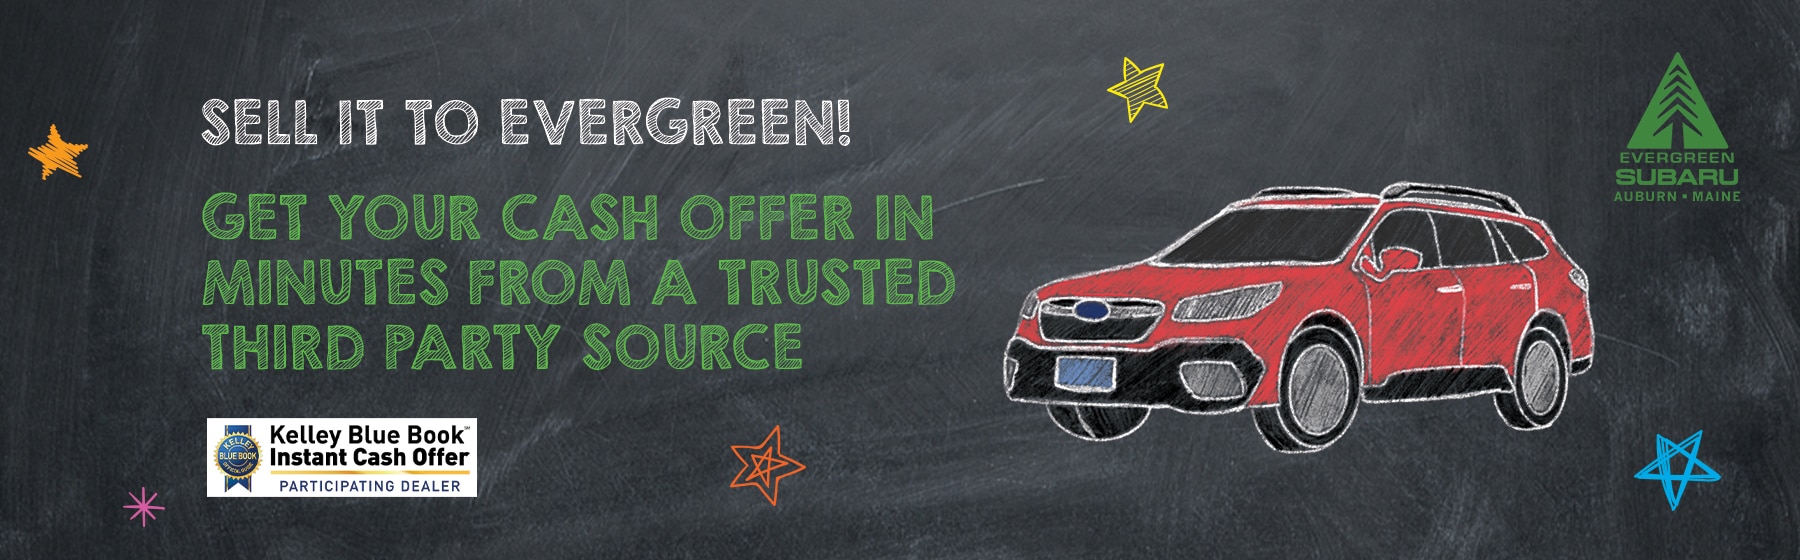 sell your vehicle to Evergreen, Get your offer in minutes from a trusted 3rd party source